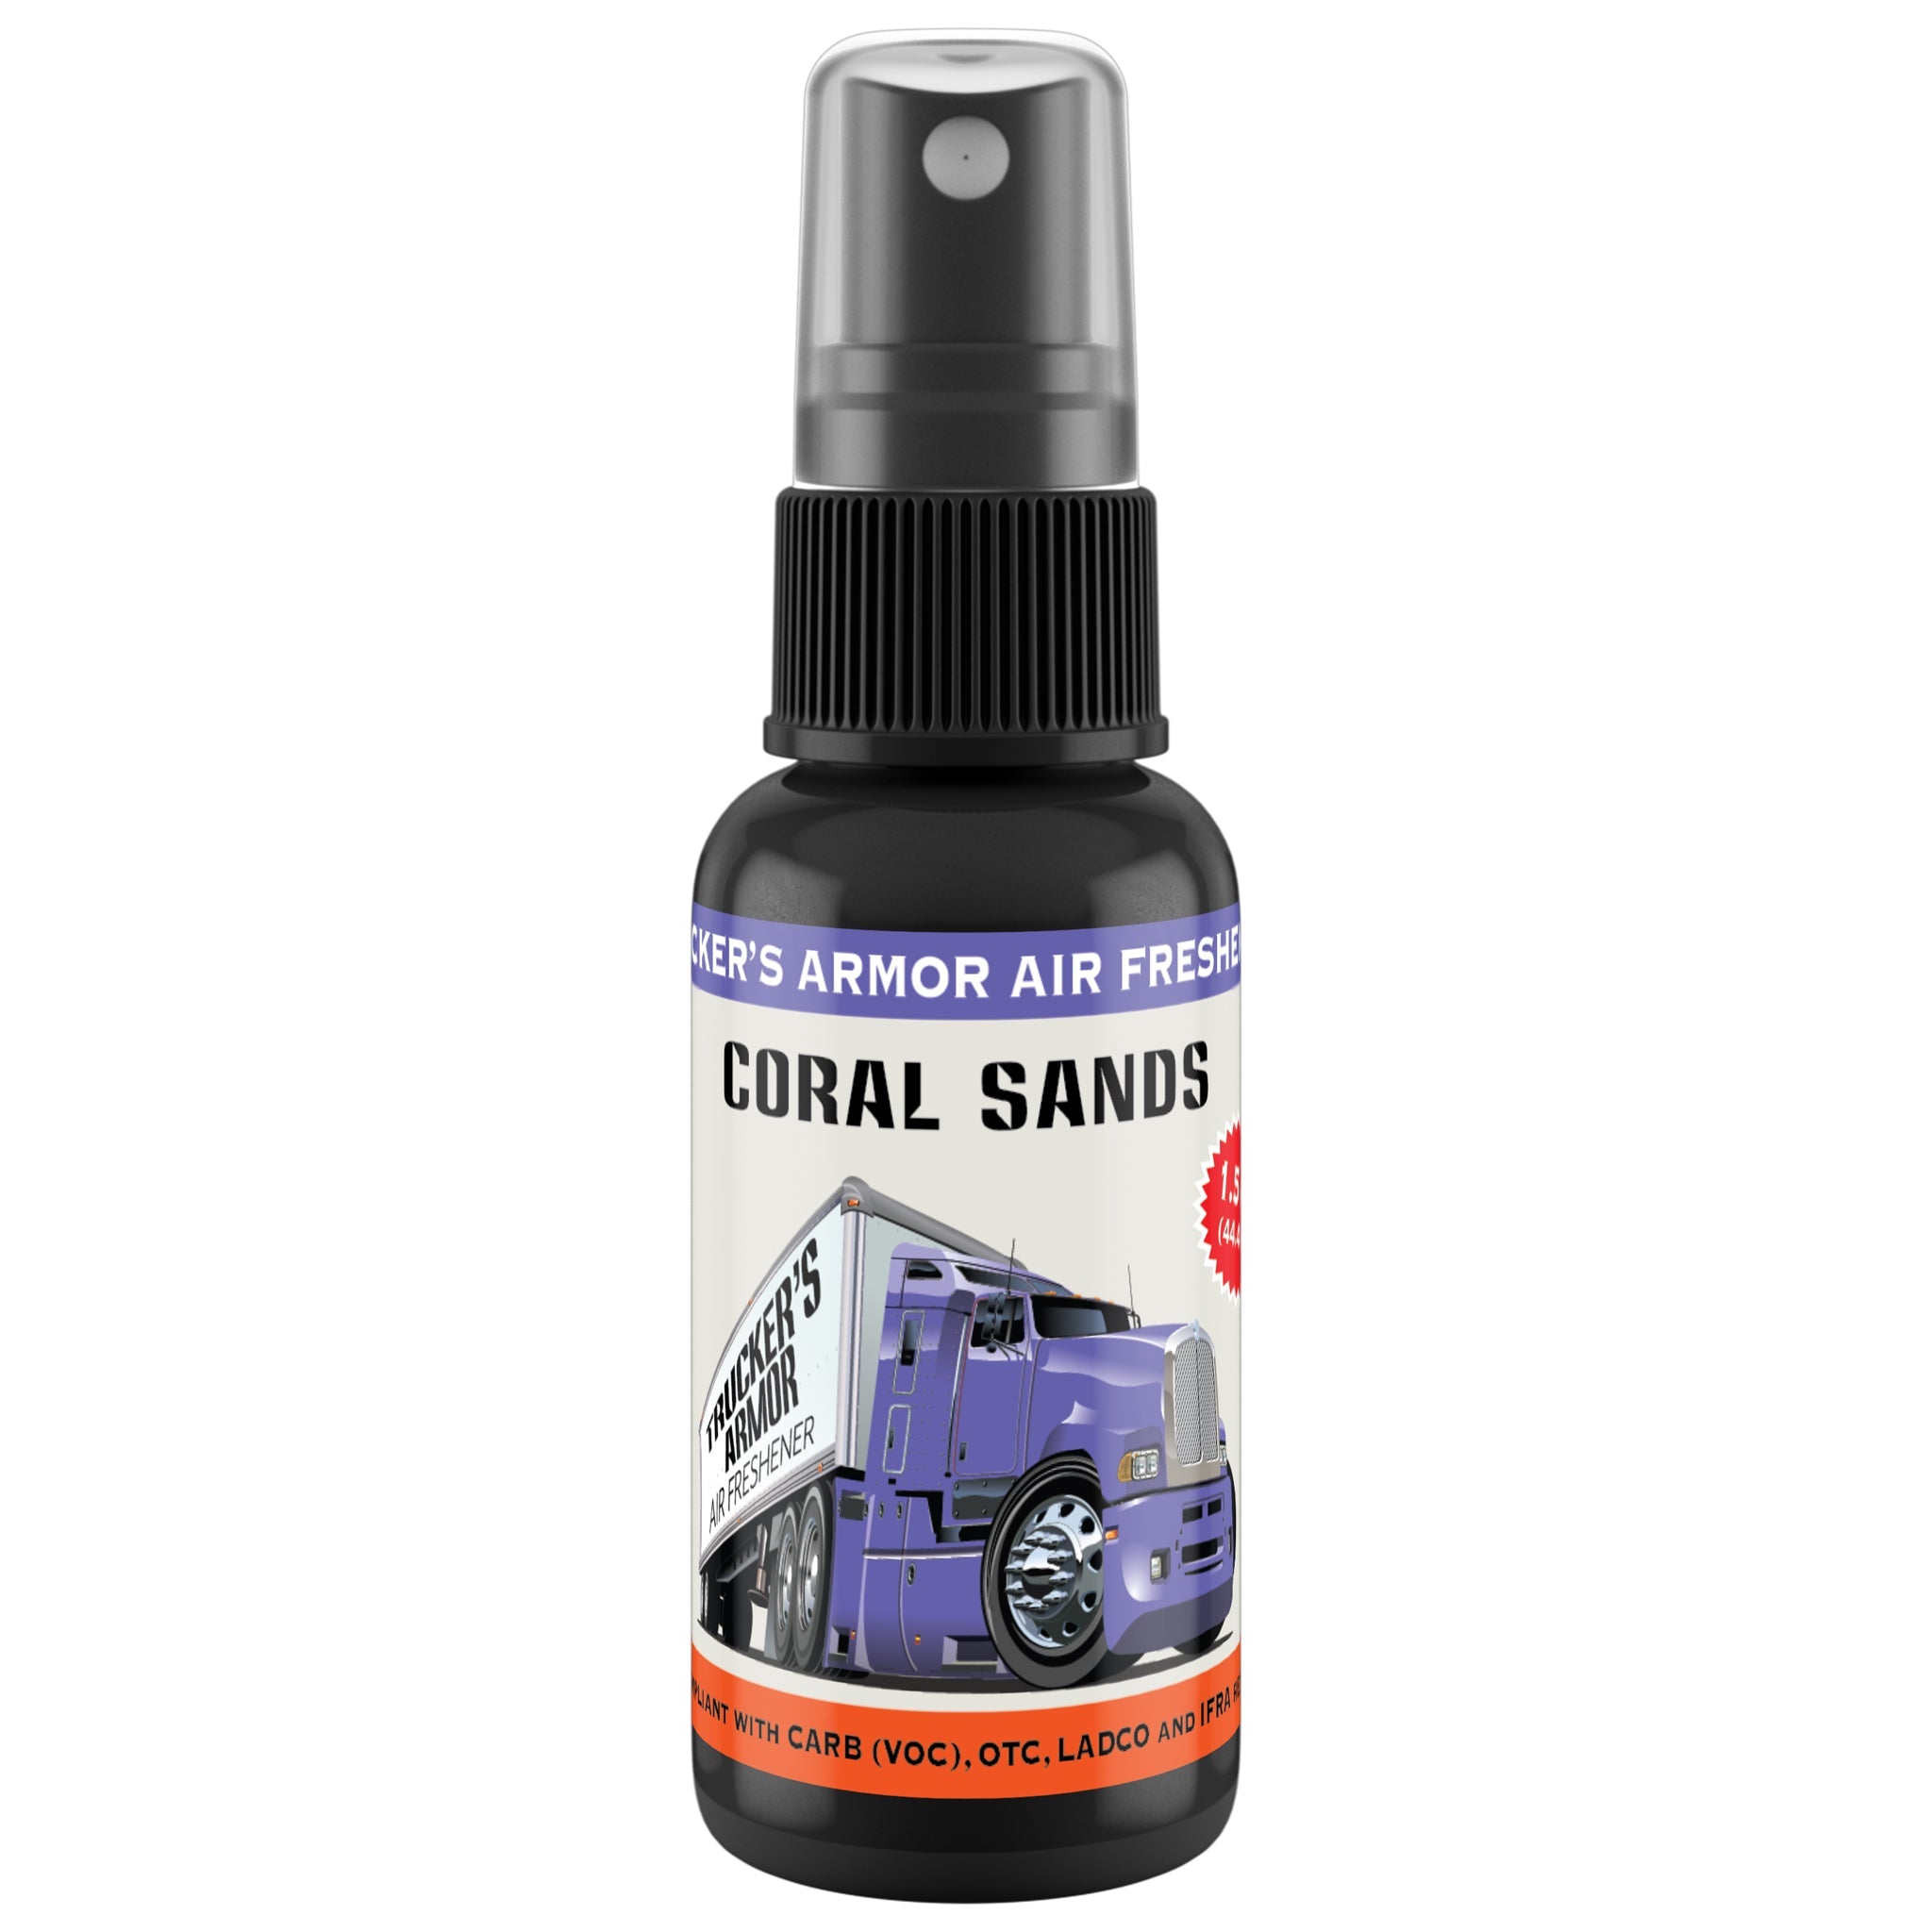 Trucker's Armor Air Freshener - Coral Sands Scent